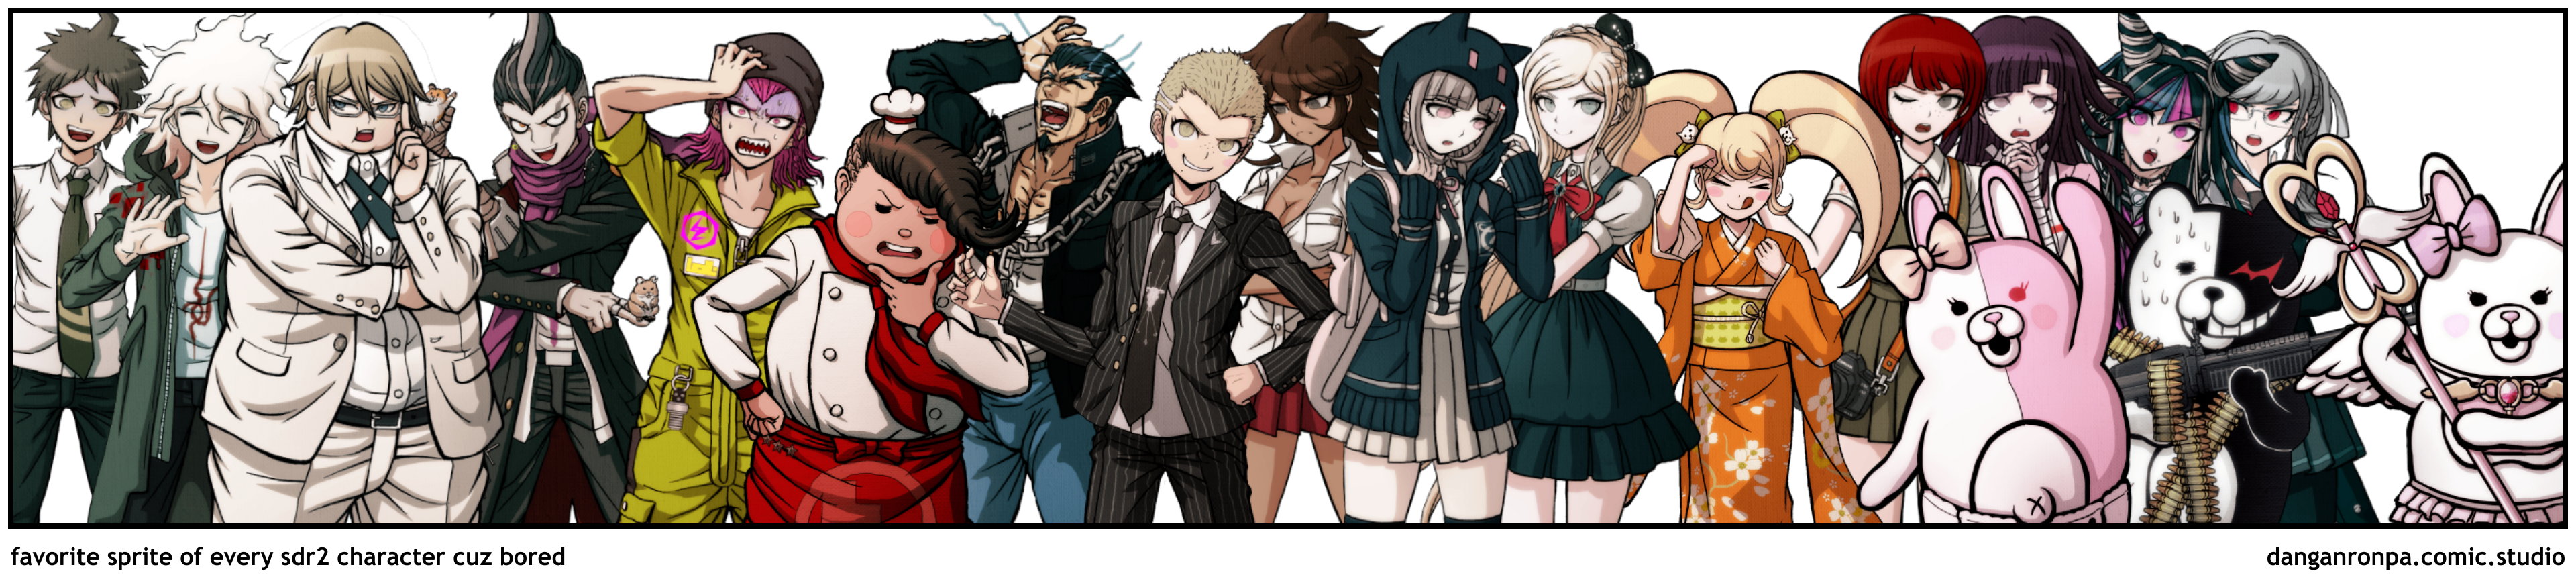 favorite sprite of every sdr2 character cuz bored